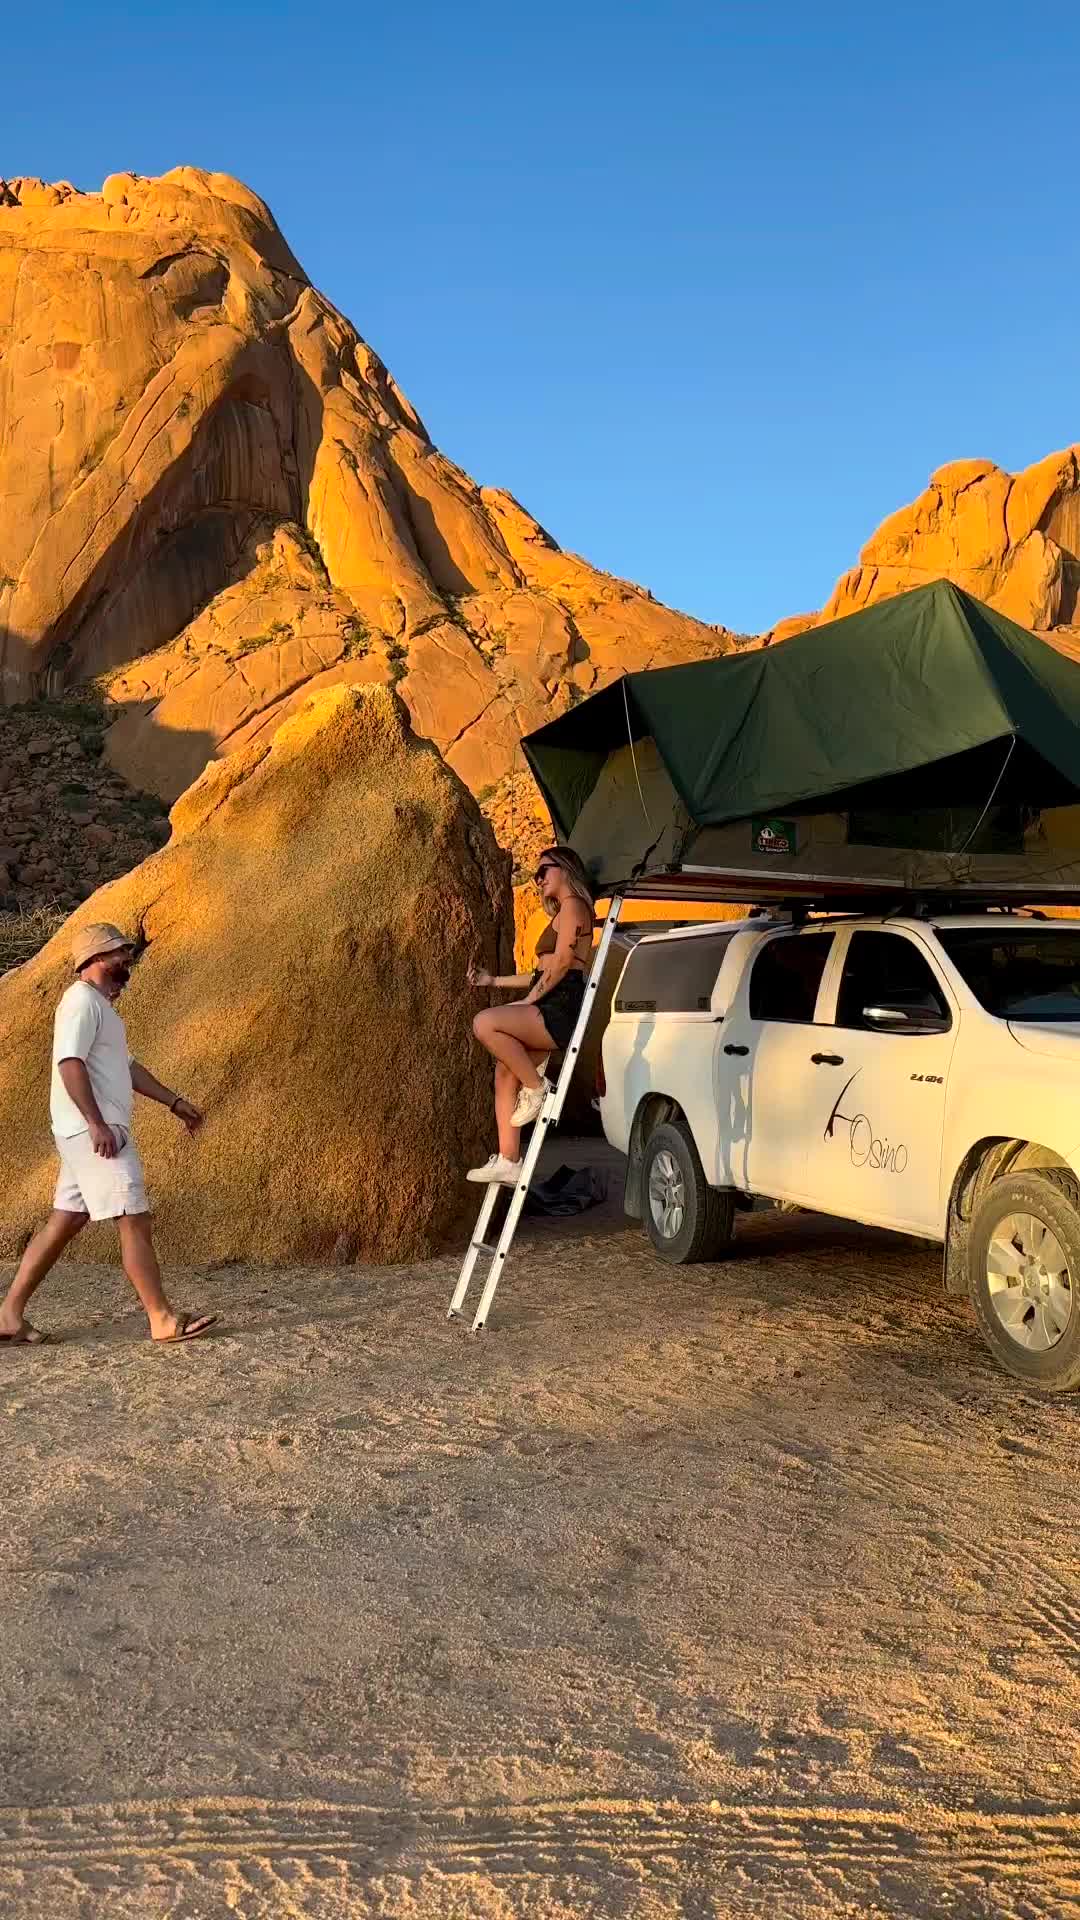 Namibia Road Trip Adventure: Camping at Spitzkoppe